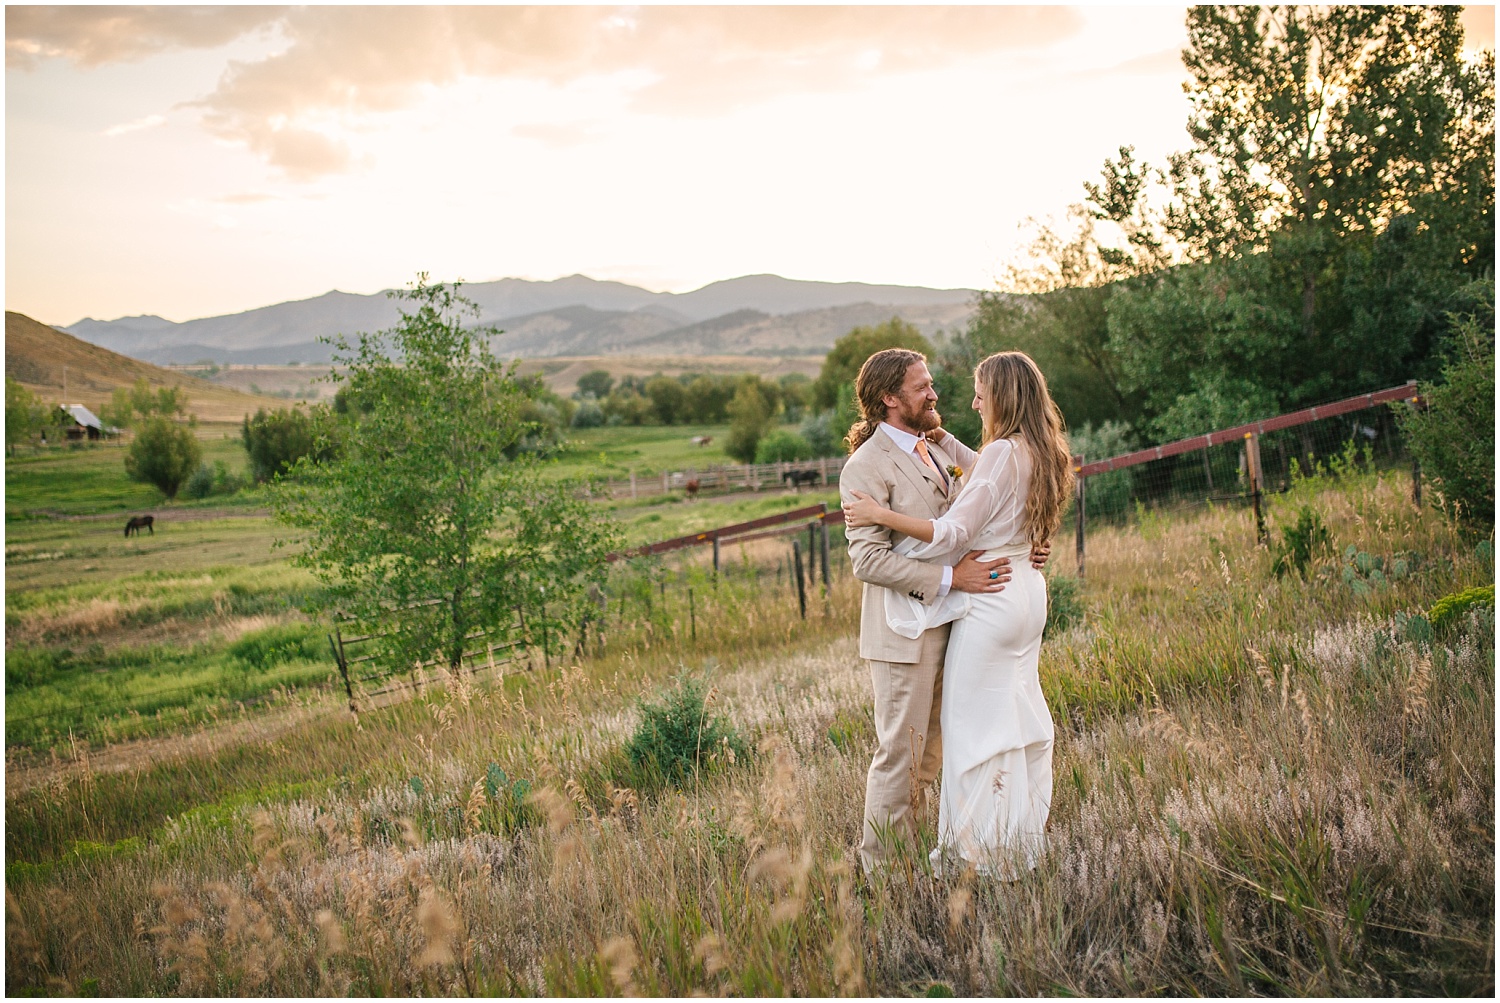 Bride and groom dancing on a hill overlooking the mountains at sunset at Lone Hawk Farm wedding in Longmont Colorado